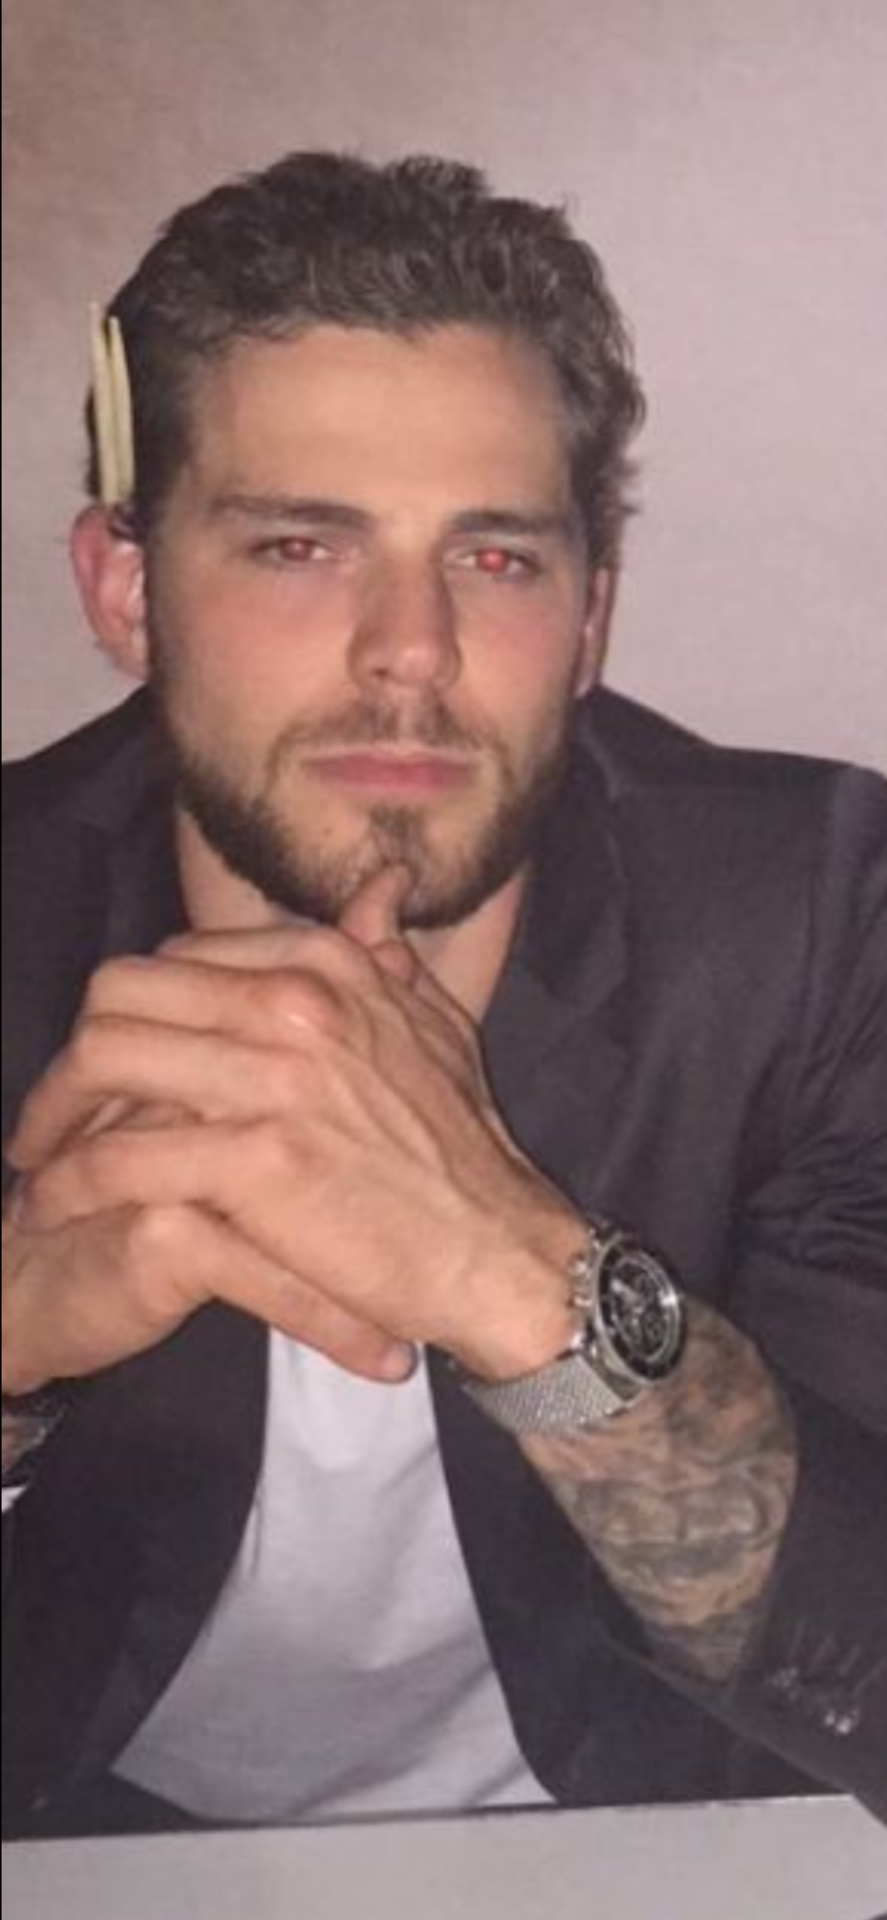 My Hockey World — What Tyler Seguin would be like on New Year's Eve